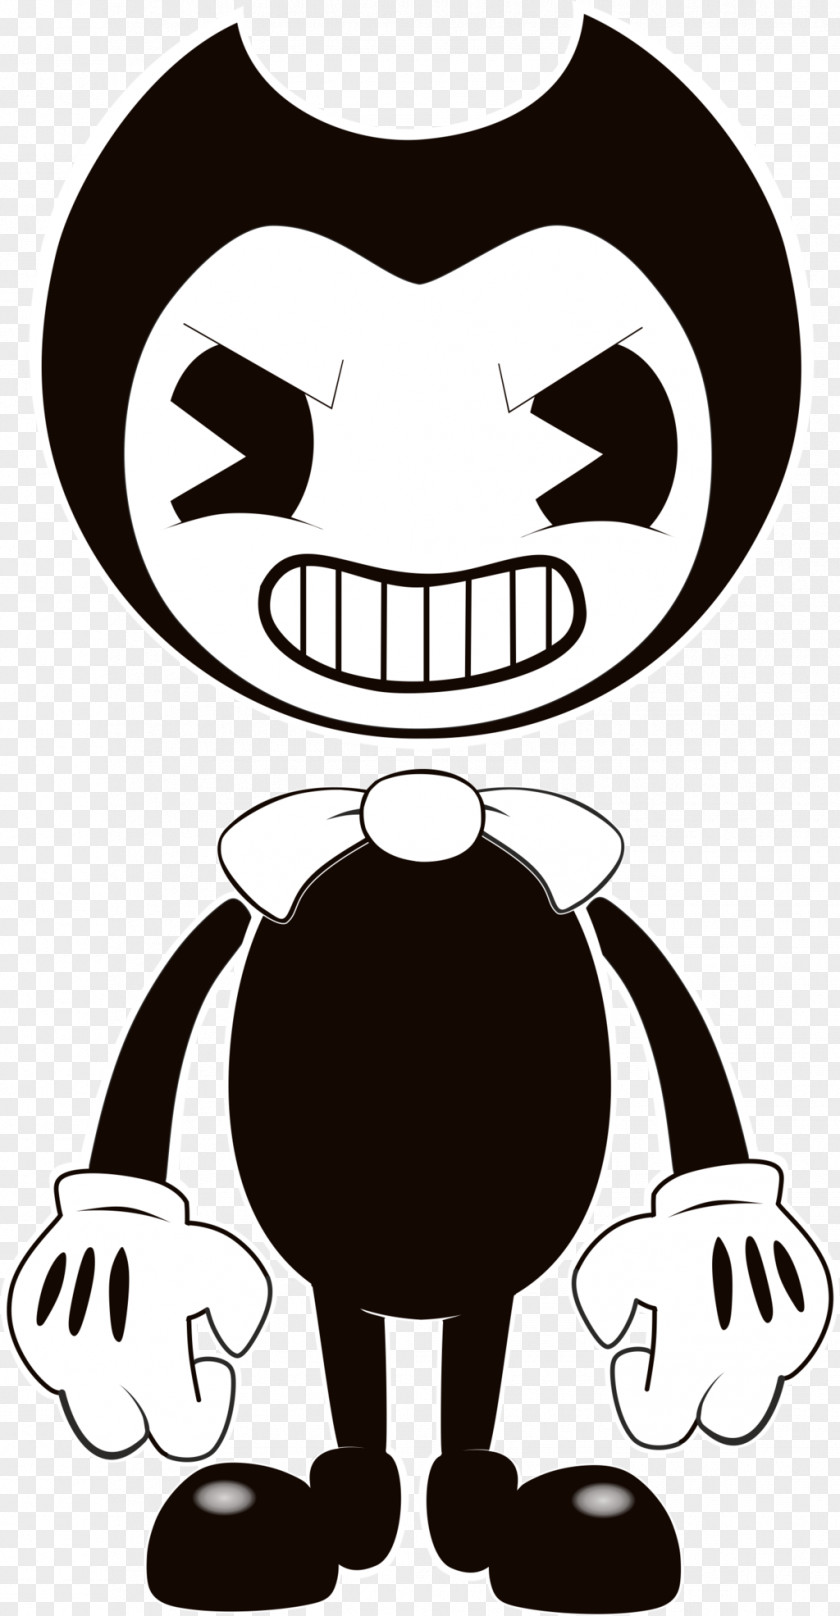 Coming Soon Bendy And The Ink Machine Song Video Game TheMeatly Games Survival Horror PNG